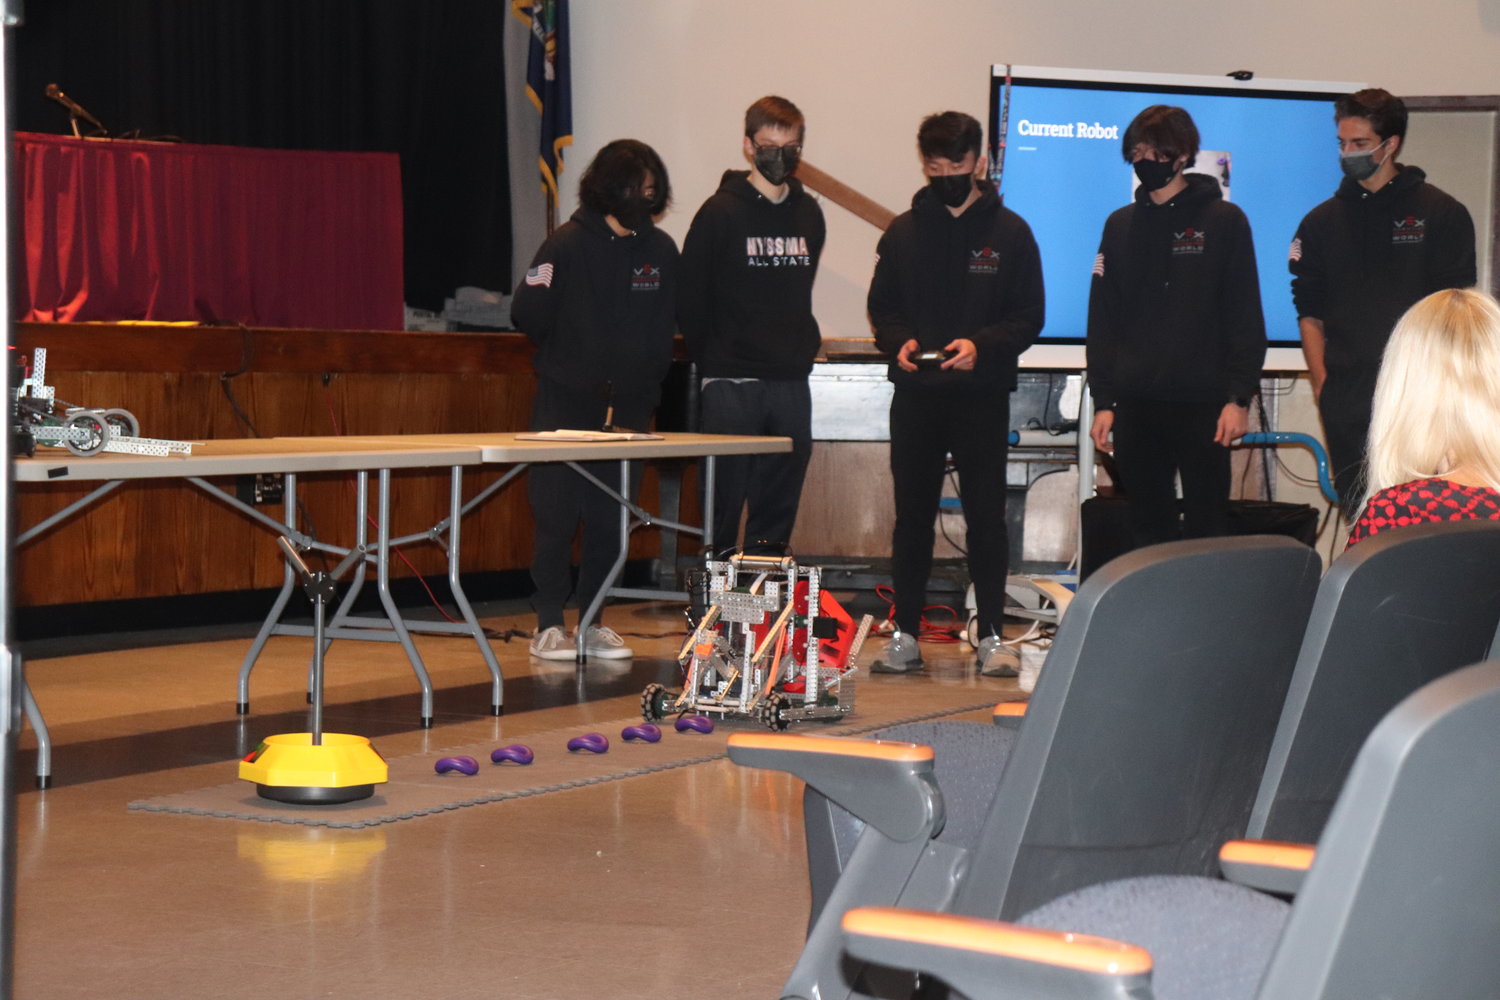 During the meeting, the VEX high school robotics team demonstrated their robot that picks up “ringles,” or rings that look like Pringles.